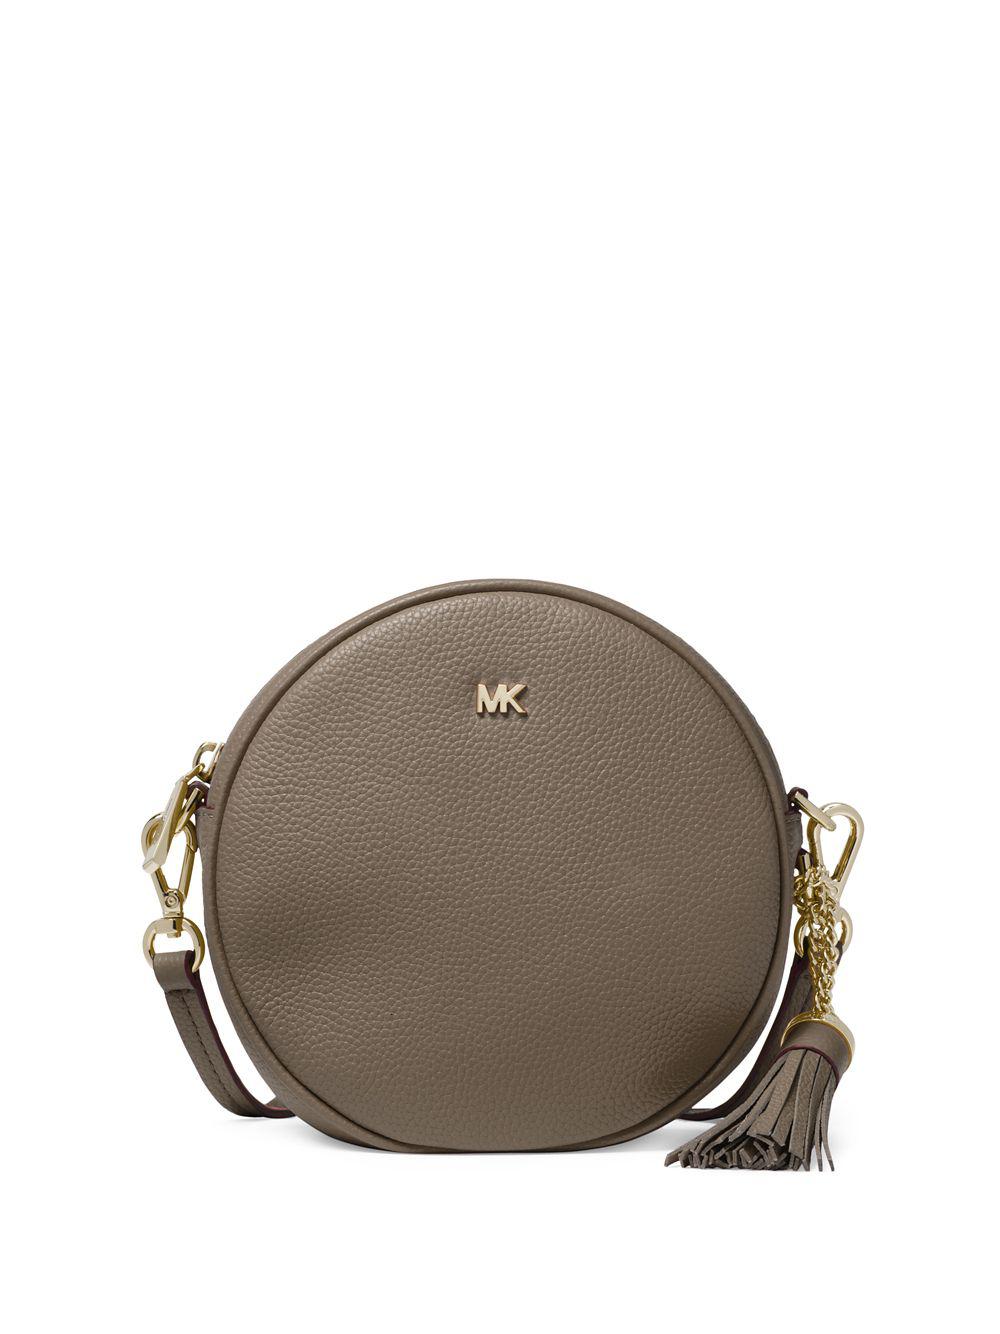 Lyst - Michael Michael Kors Canteen Leather Circle Crossbody Bag in Brown